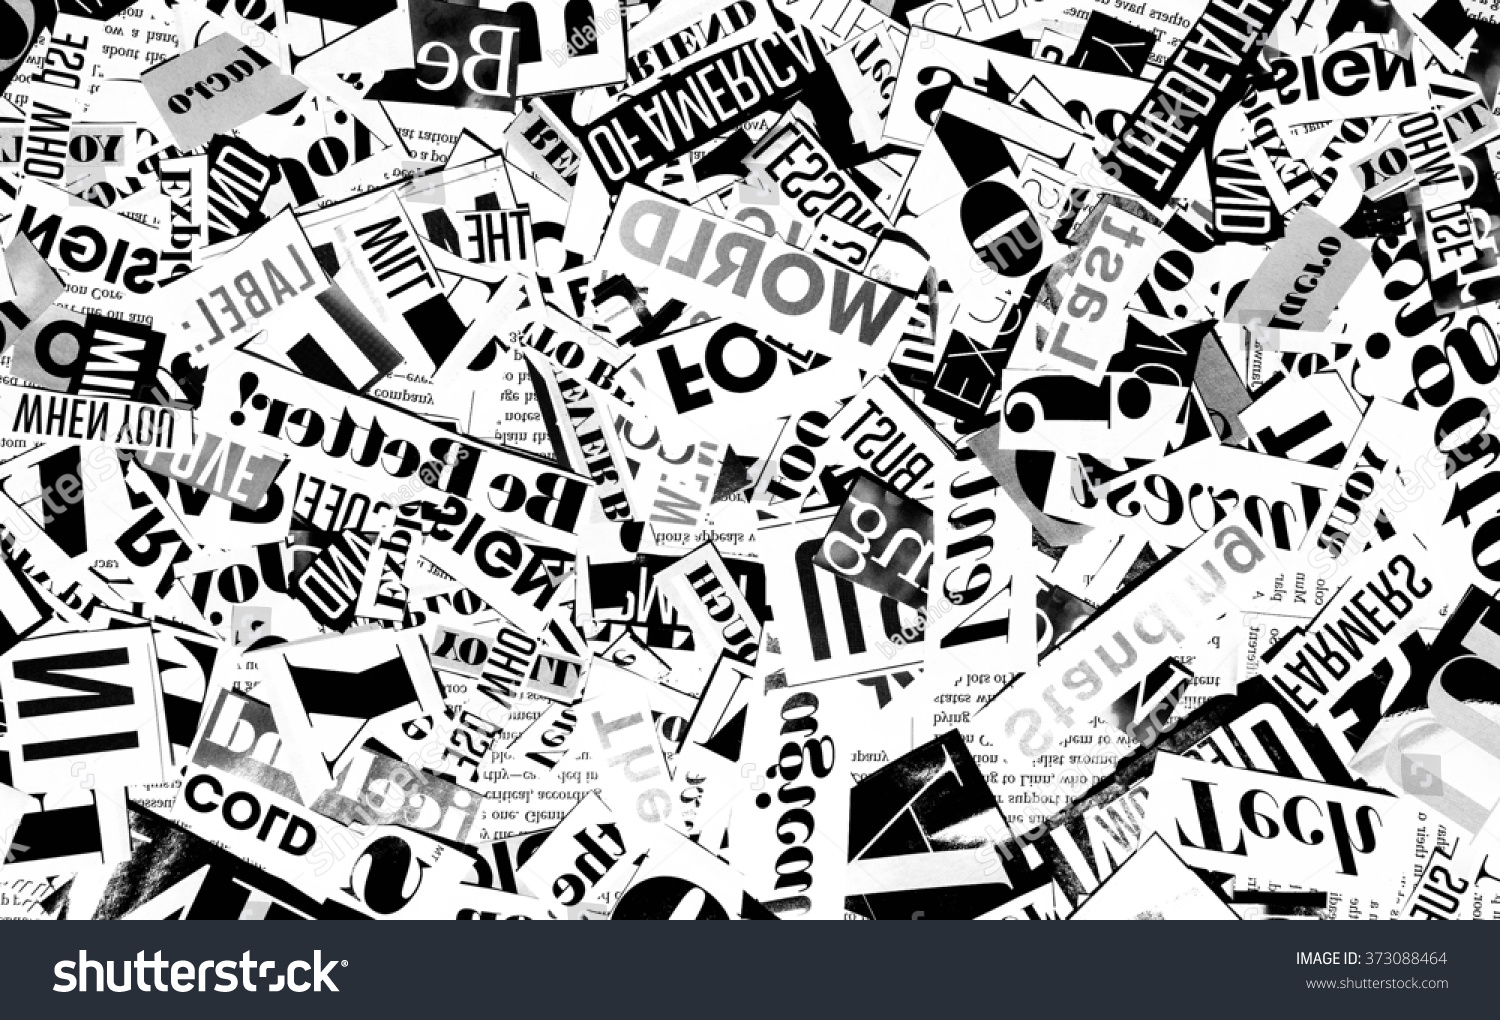 Words Cut From A Magazine, Background Stock Photo 373088464 : Shutterstock